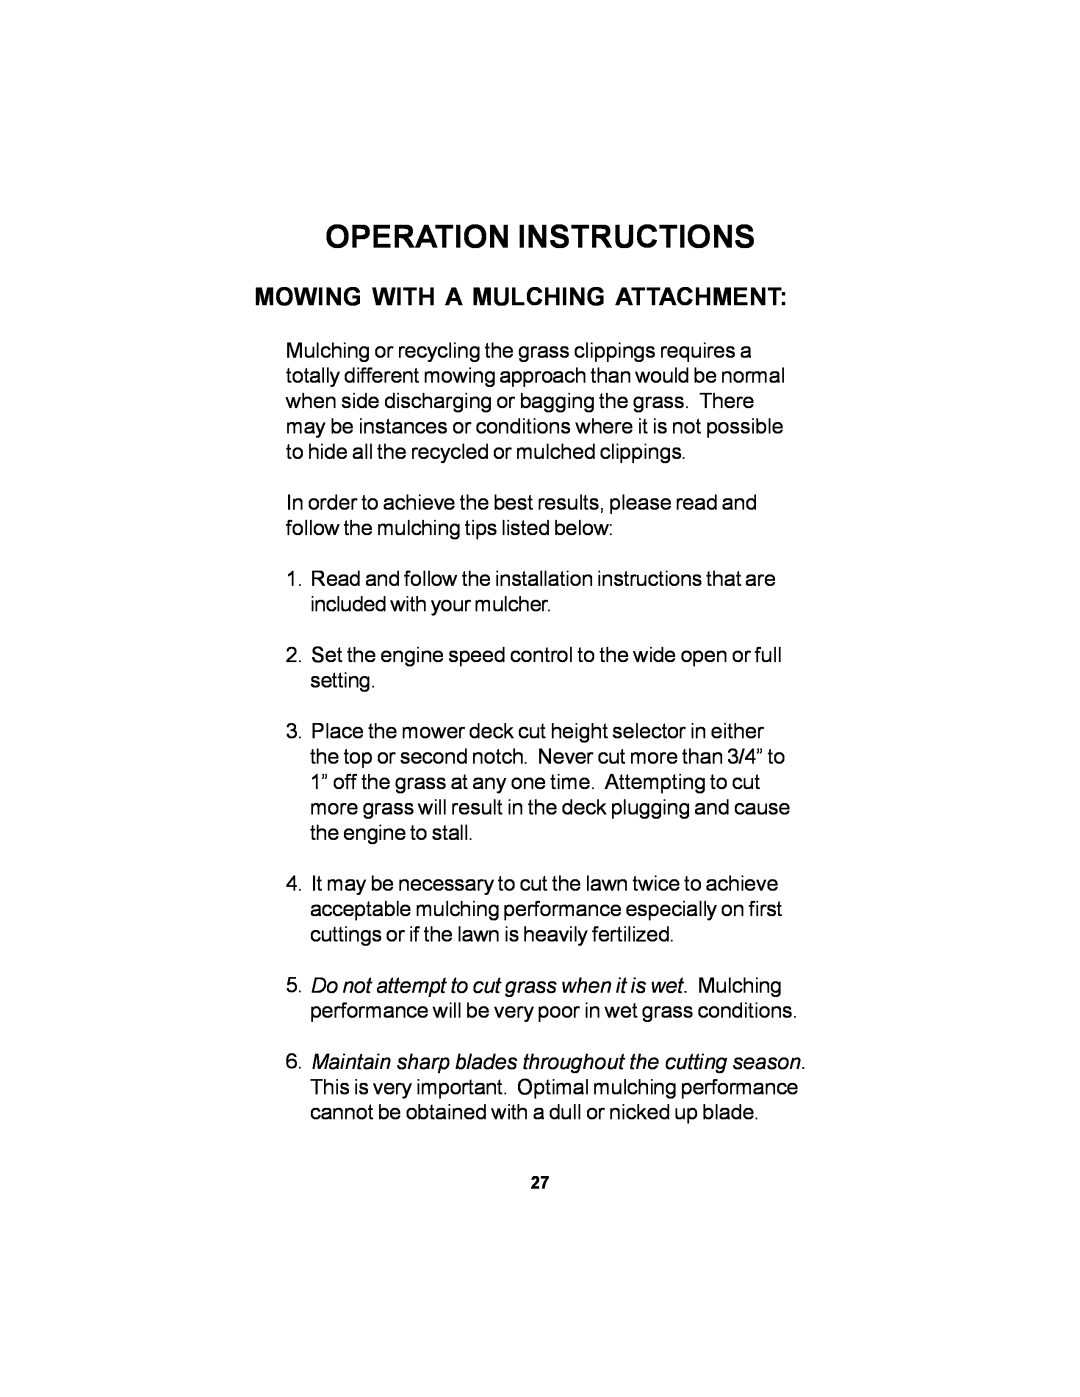 Dixon Black Bear manual Mowing With A Mulching Attachment, Operation Instructions 